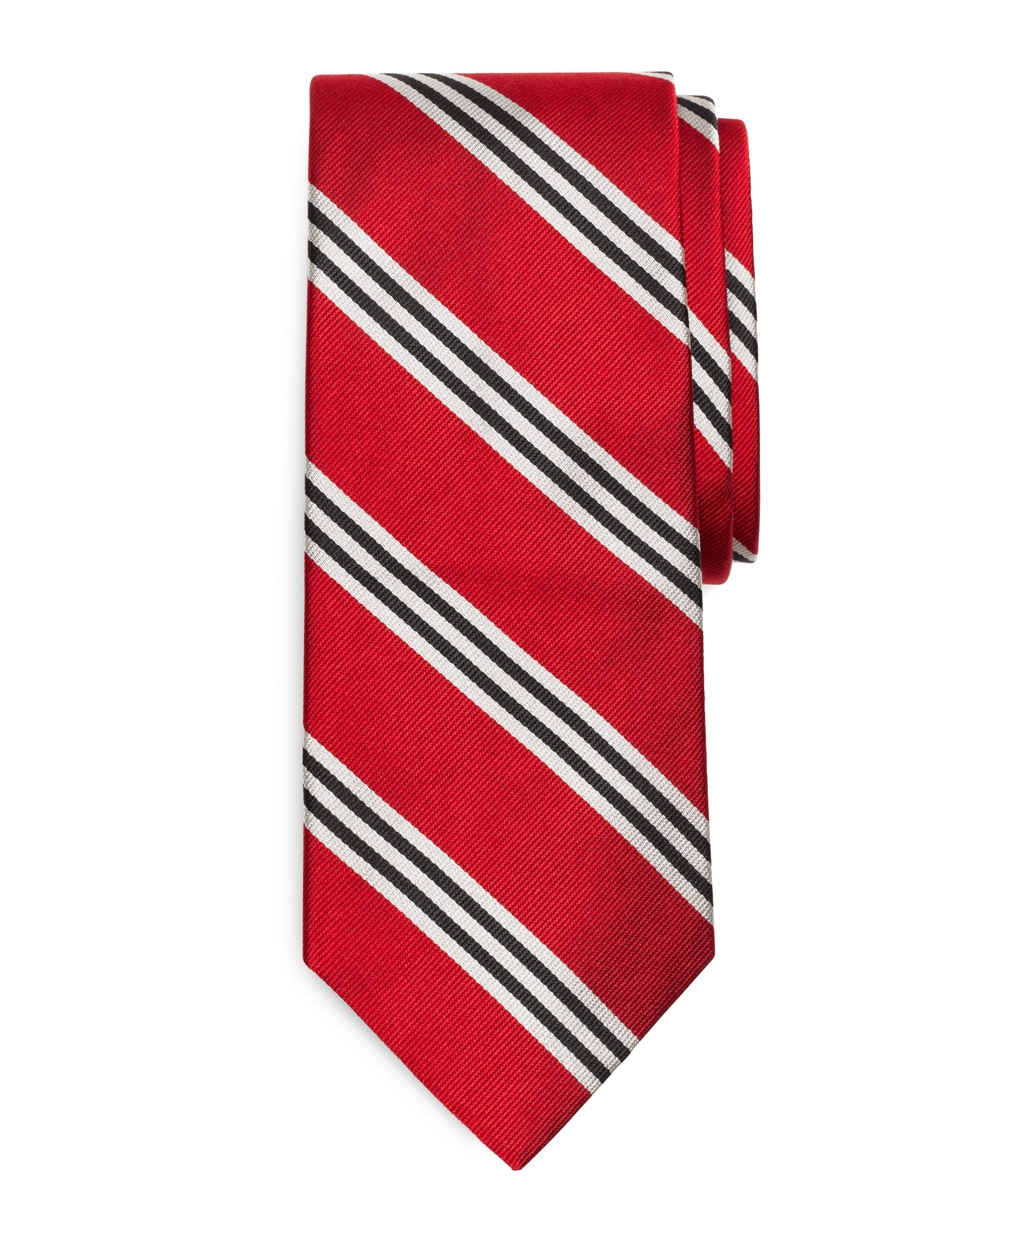 Brooks Brothers Bb#1 Repp Tie in Red-White (Gray) for Men - Lyst